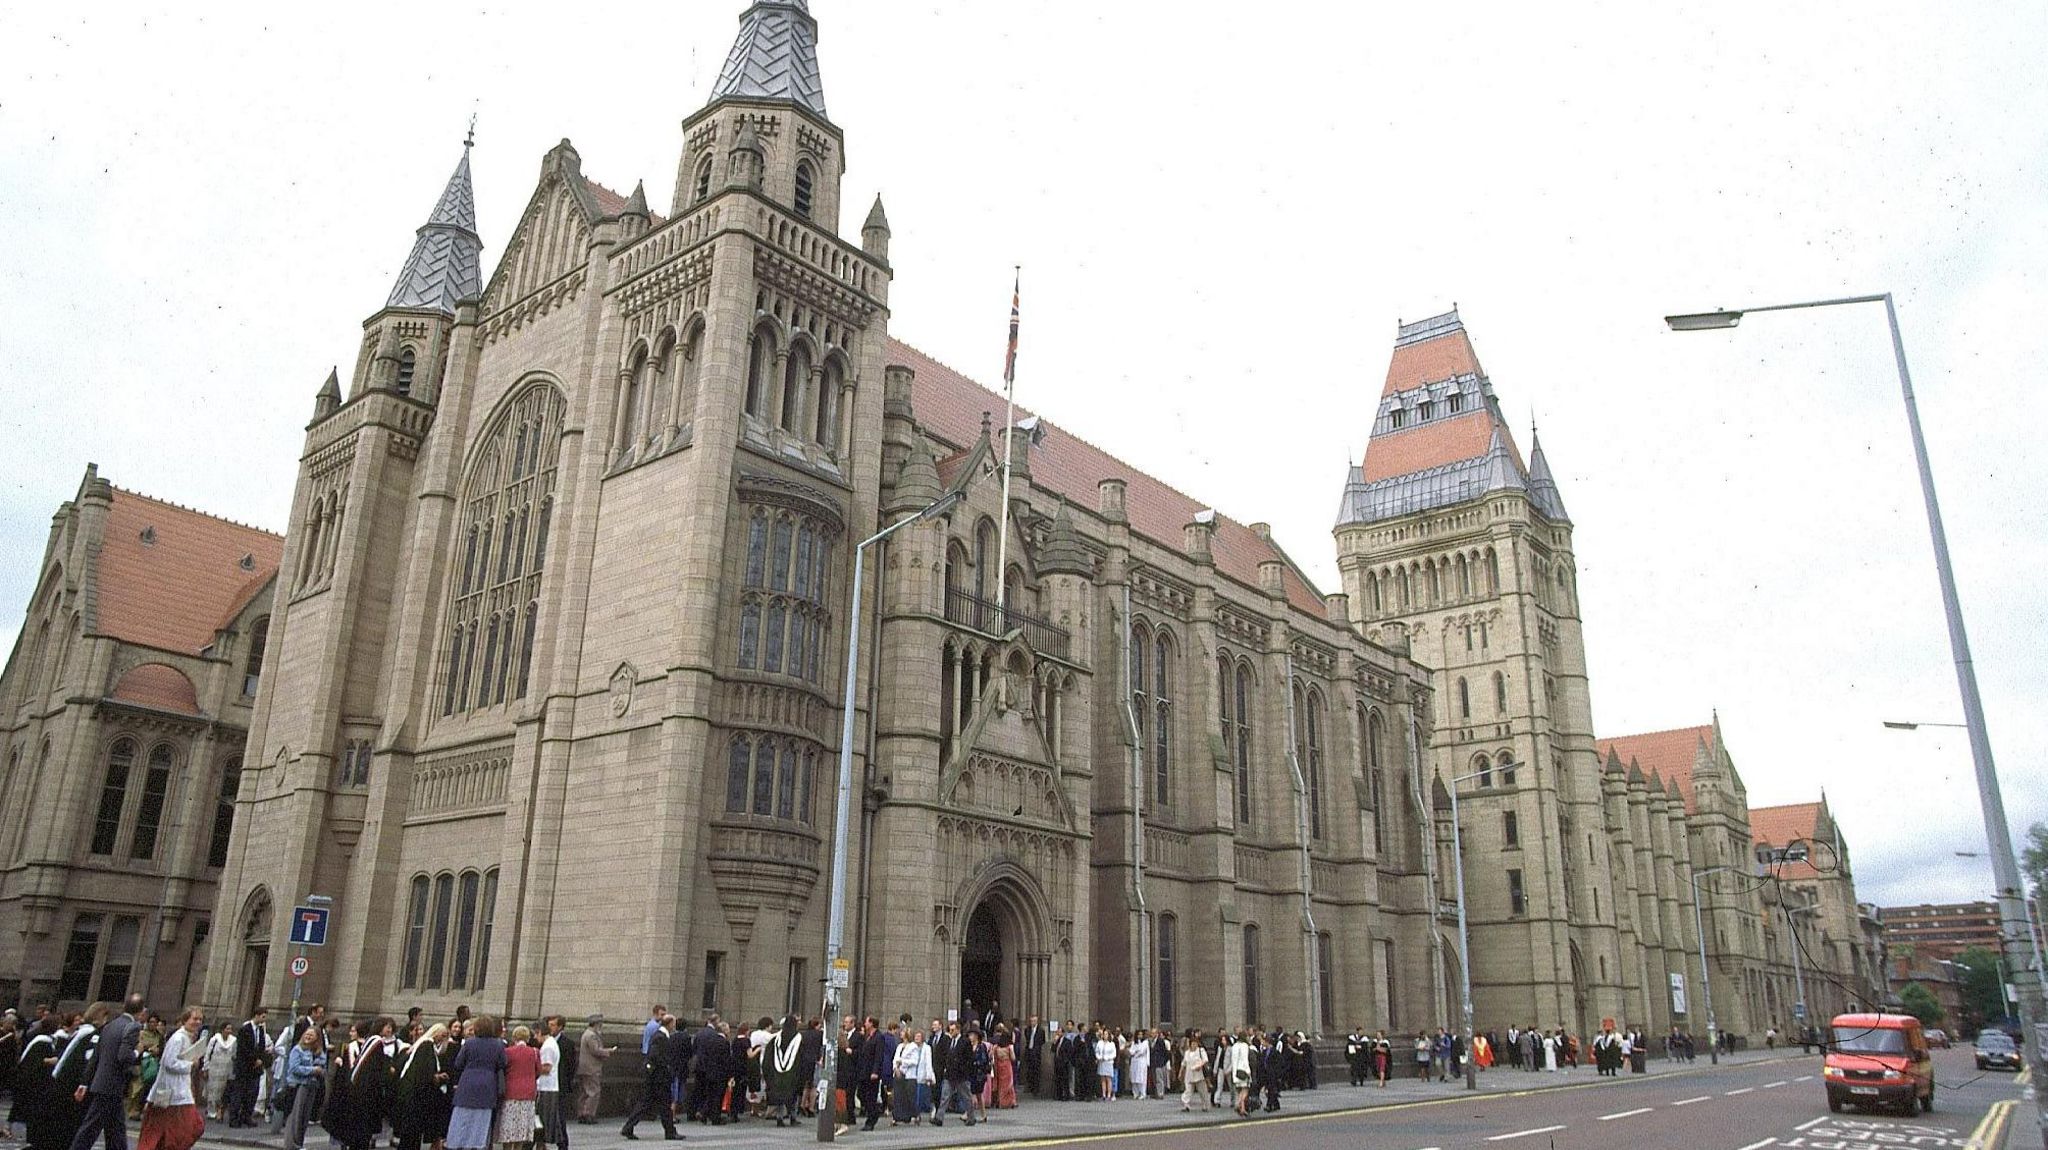 Exterior of one of the halls at the University of Manchester